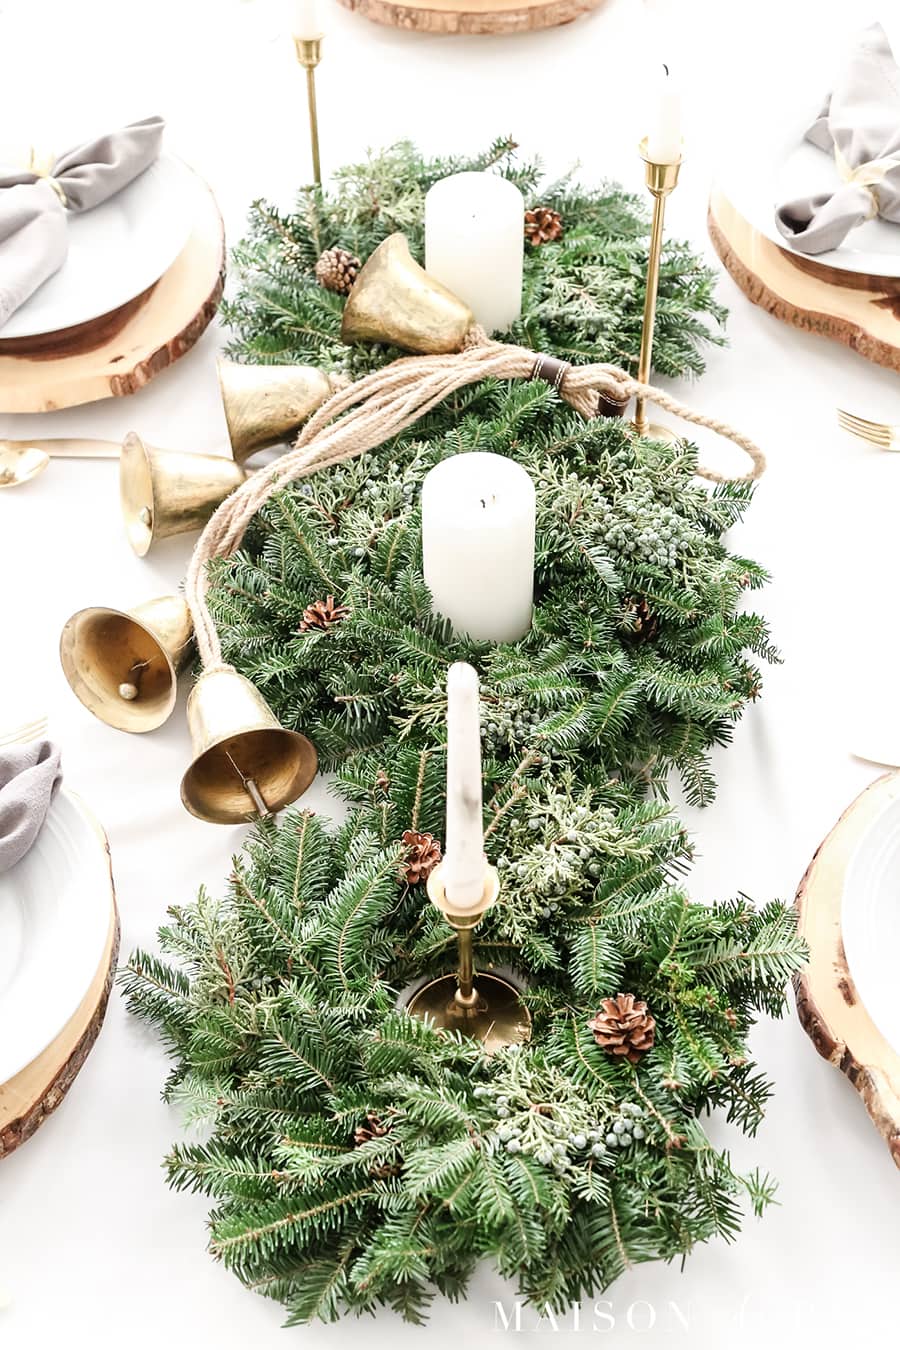 gold bells and mini wreaths as Christmas centerpiece